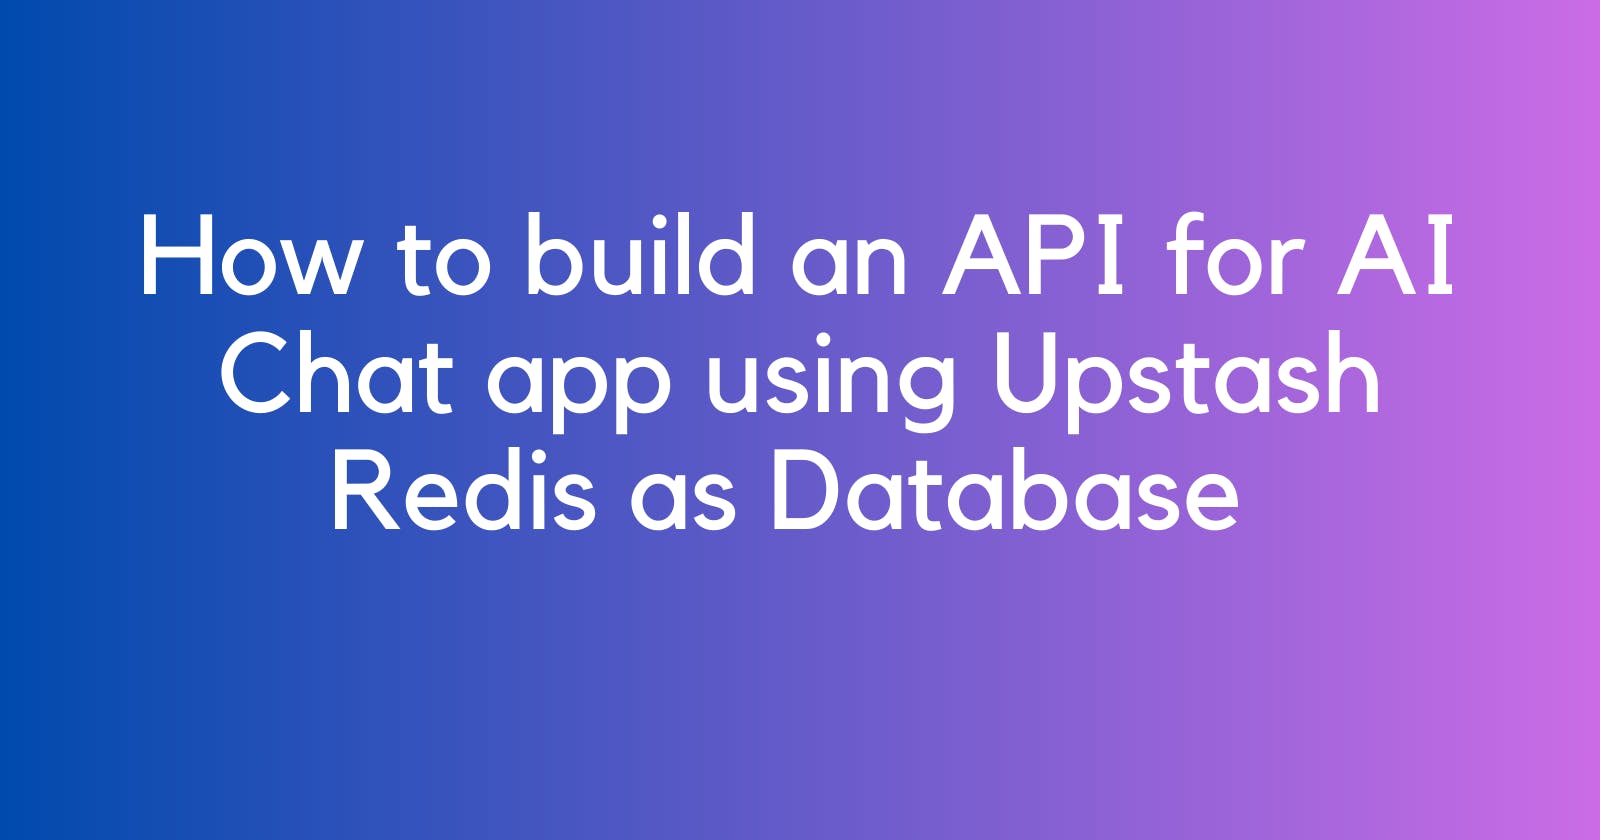 How to build an API for AI chat app using Upstash Redis as Database